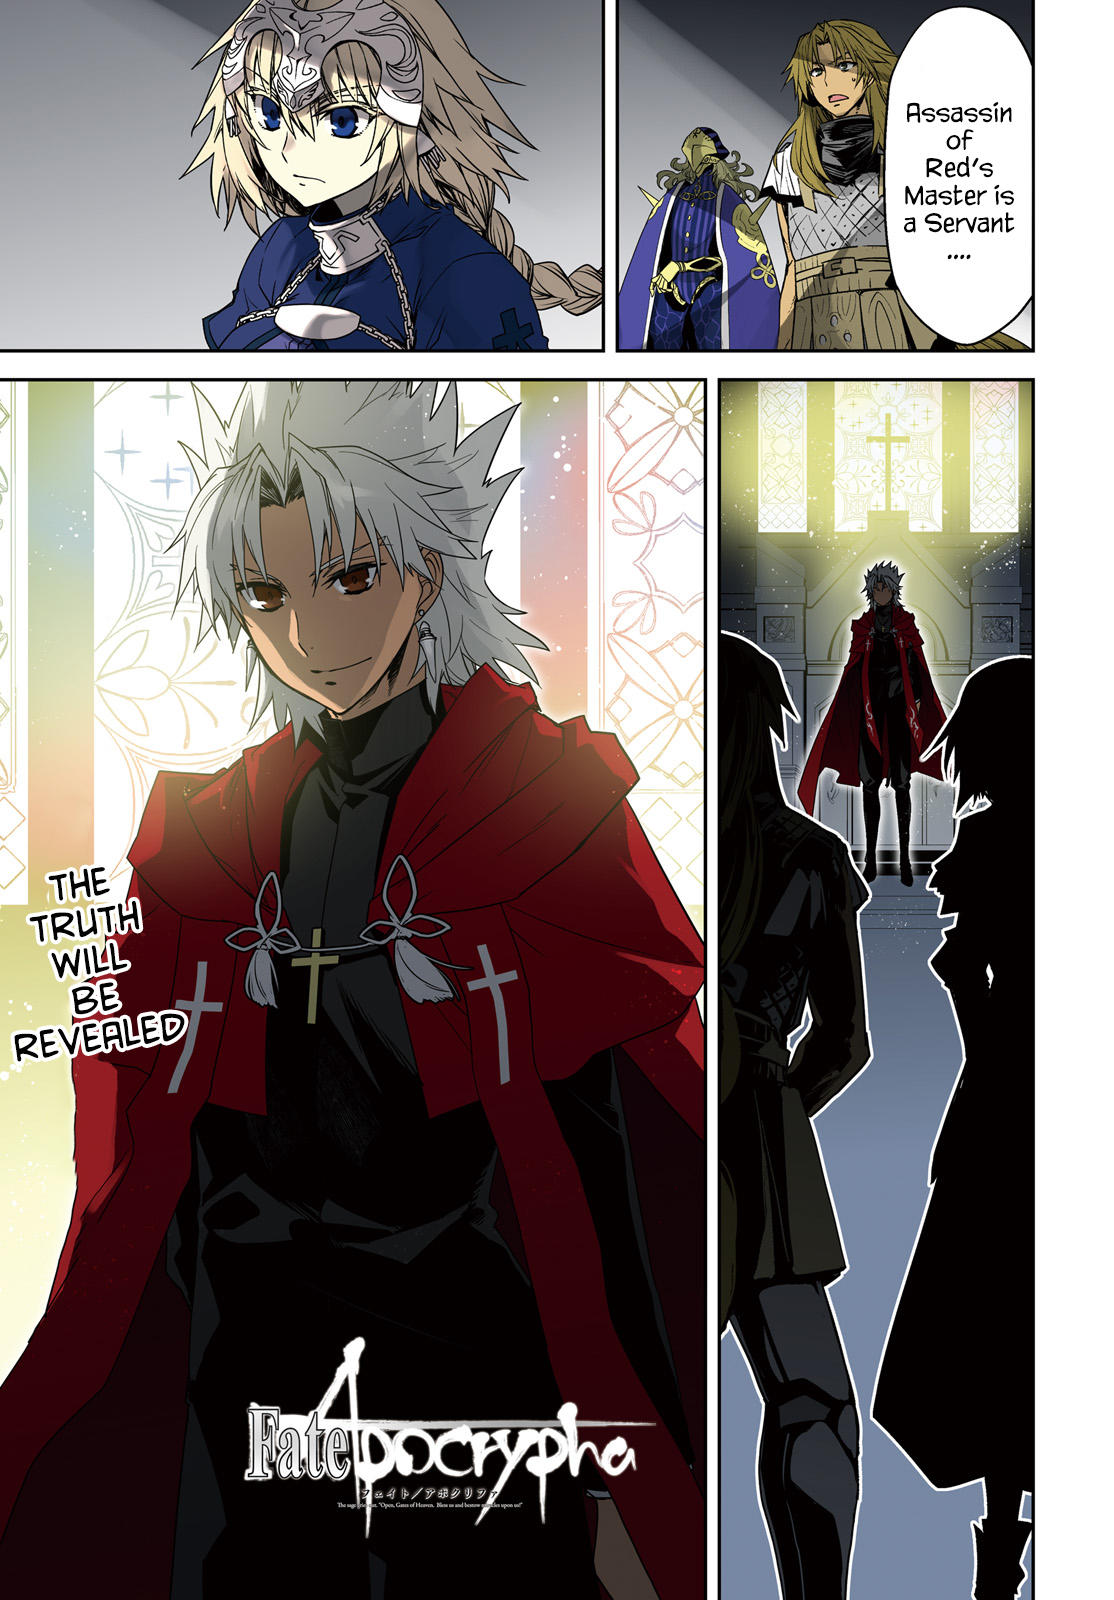 Fate Apocrypha Chapter 30 Read Fate Apocrypha Chapter 30 Online At Heroes Coach